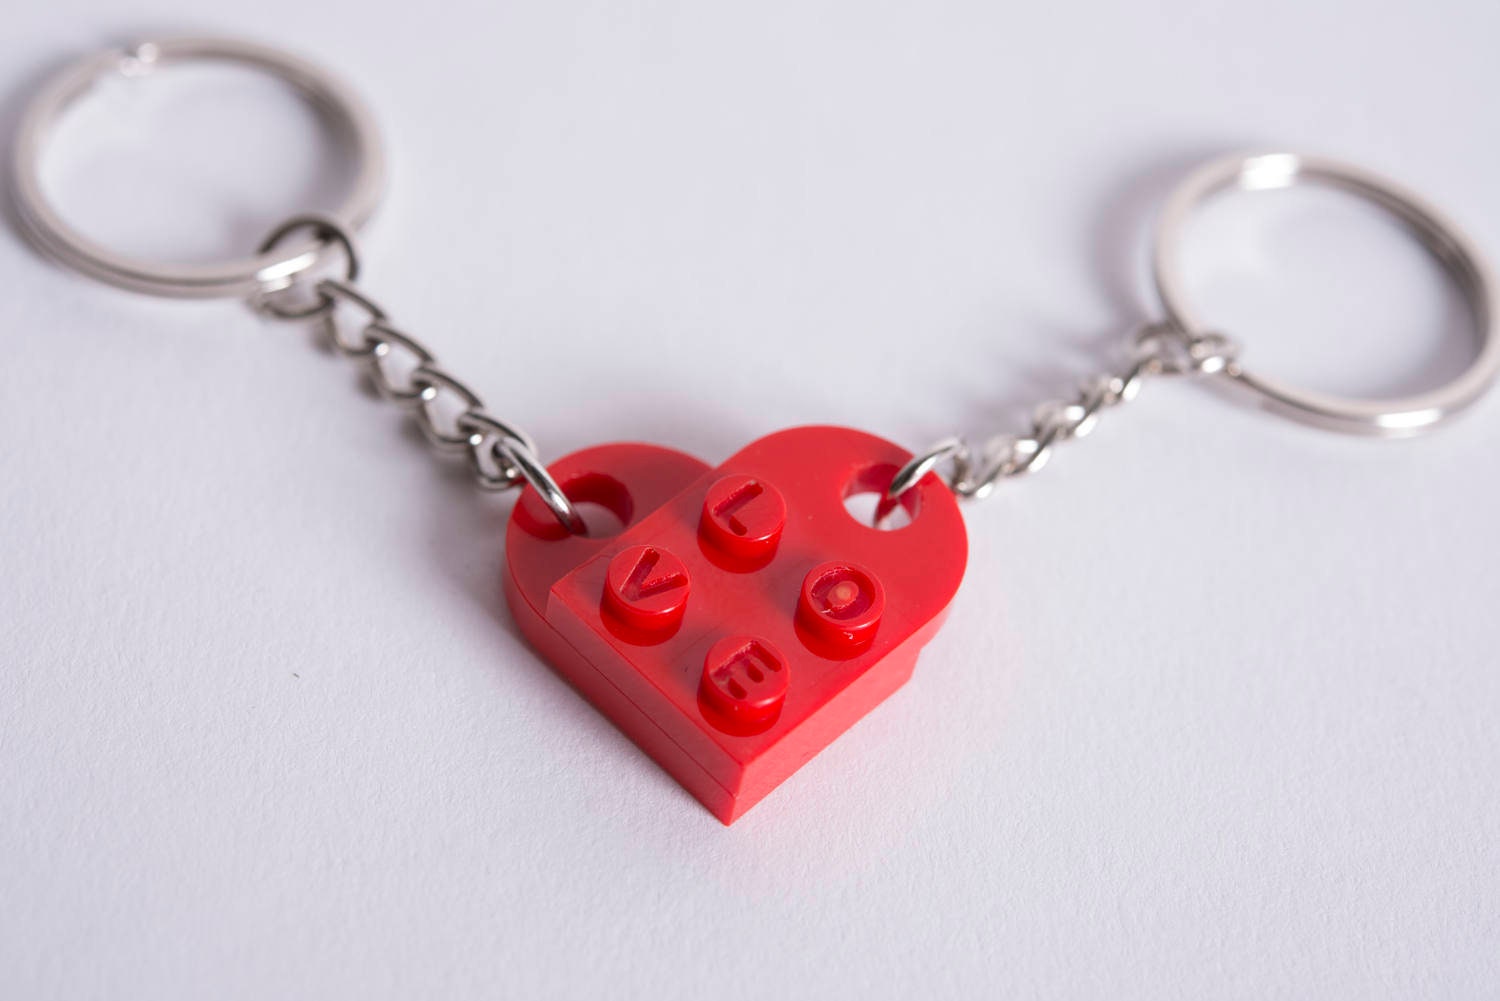 His & Hers Love Heart Keyring & Necklace made with LEGO Bricks valentines day 